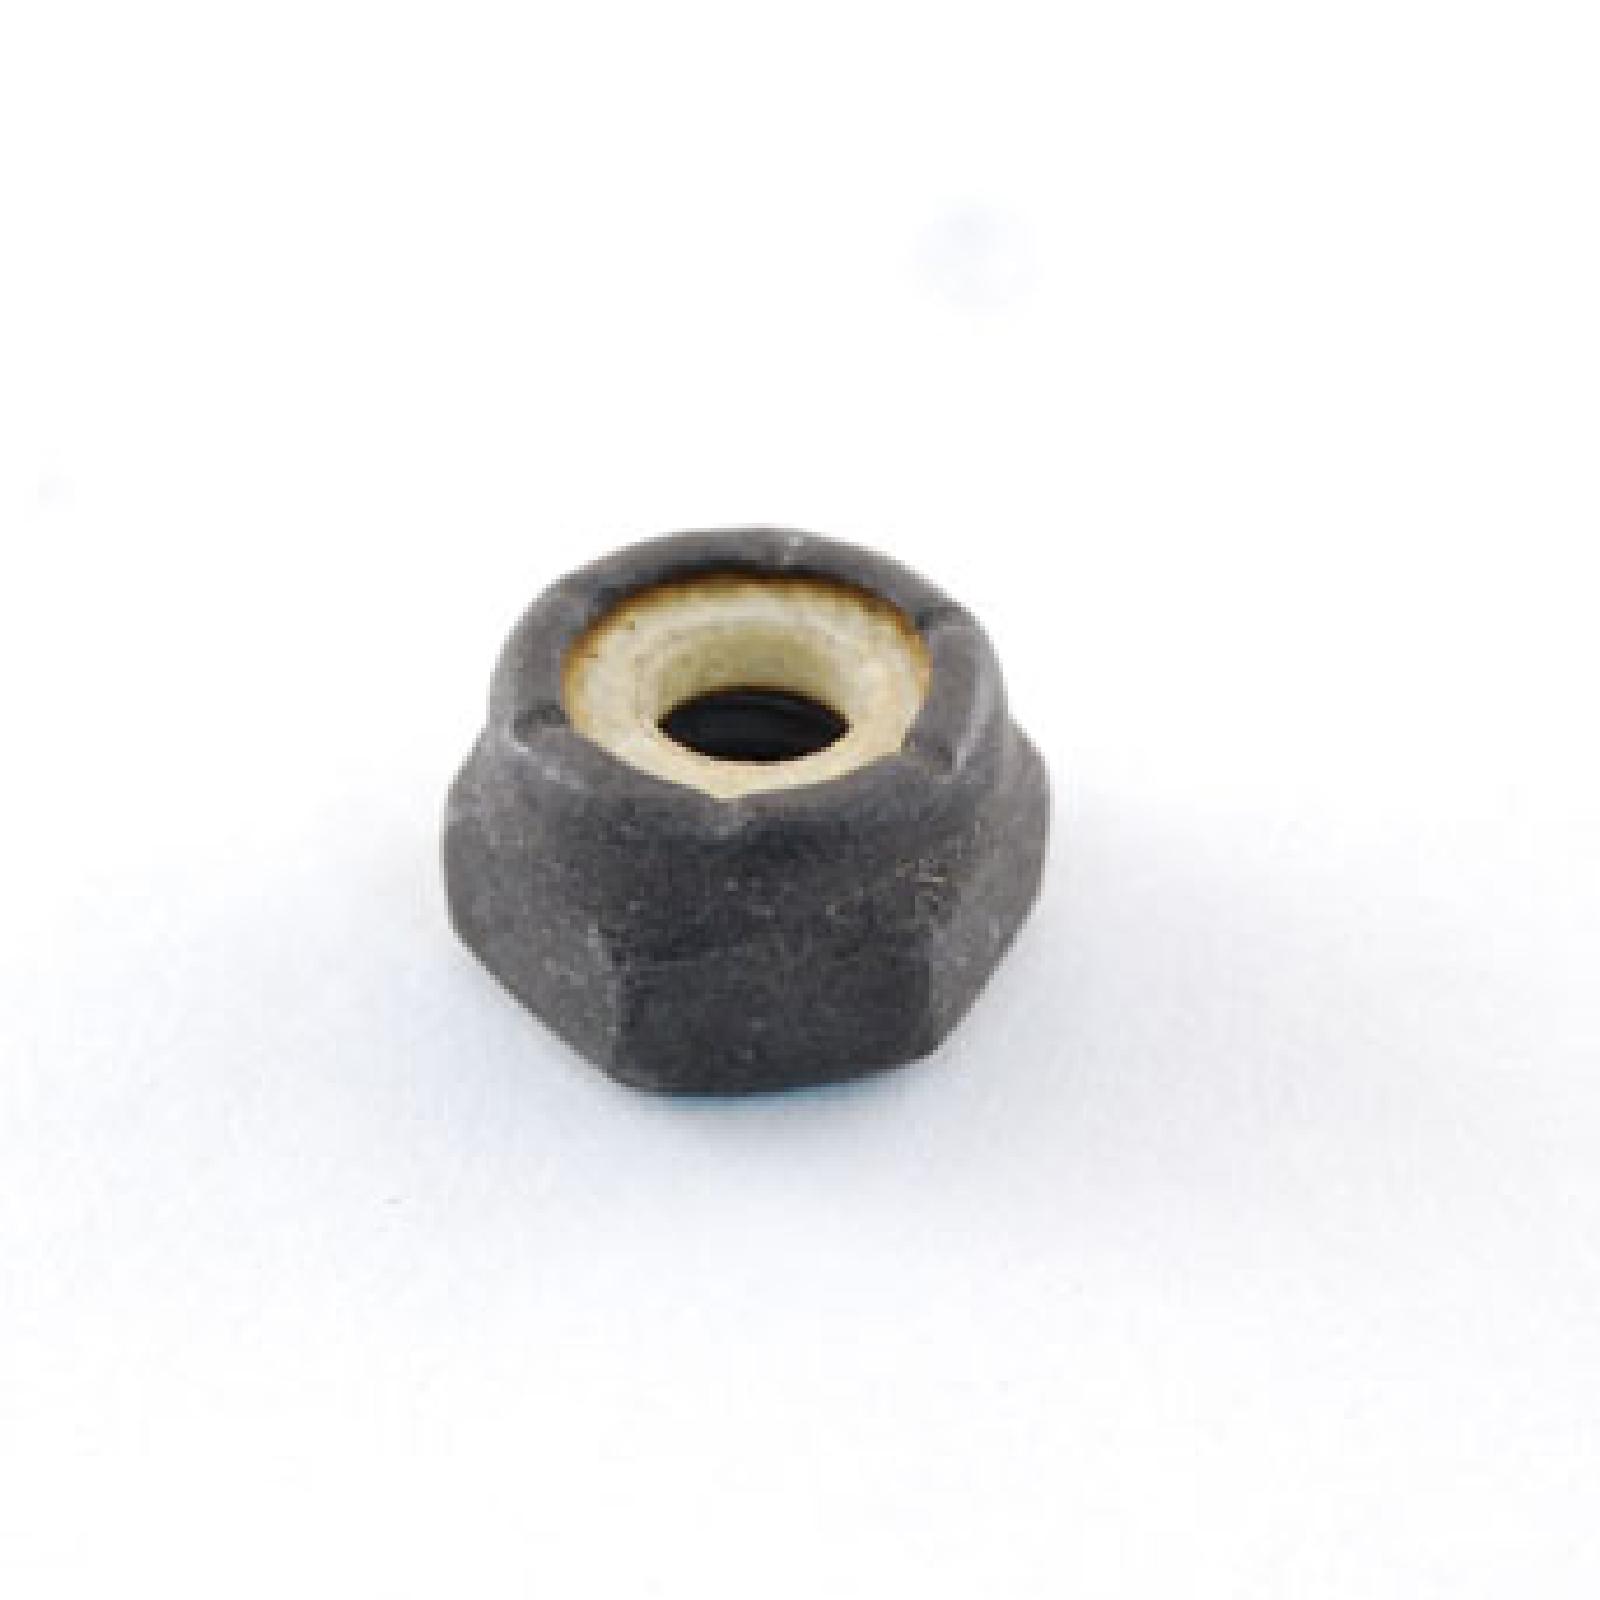 NUT HEX INS L 10 part# 712-0161 by MTD